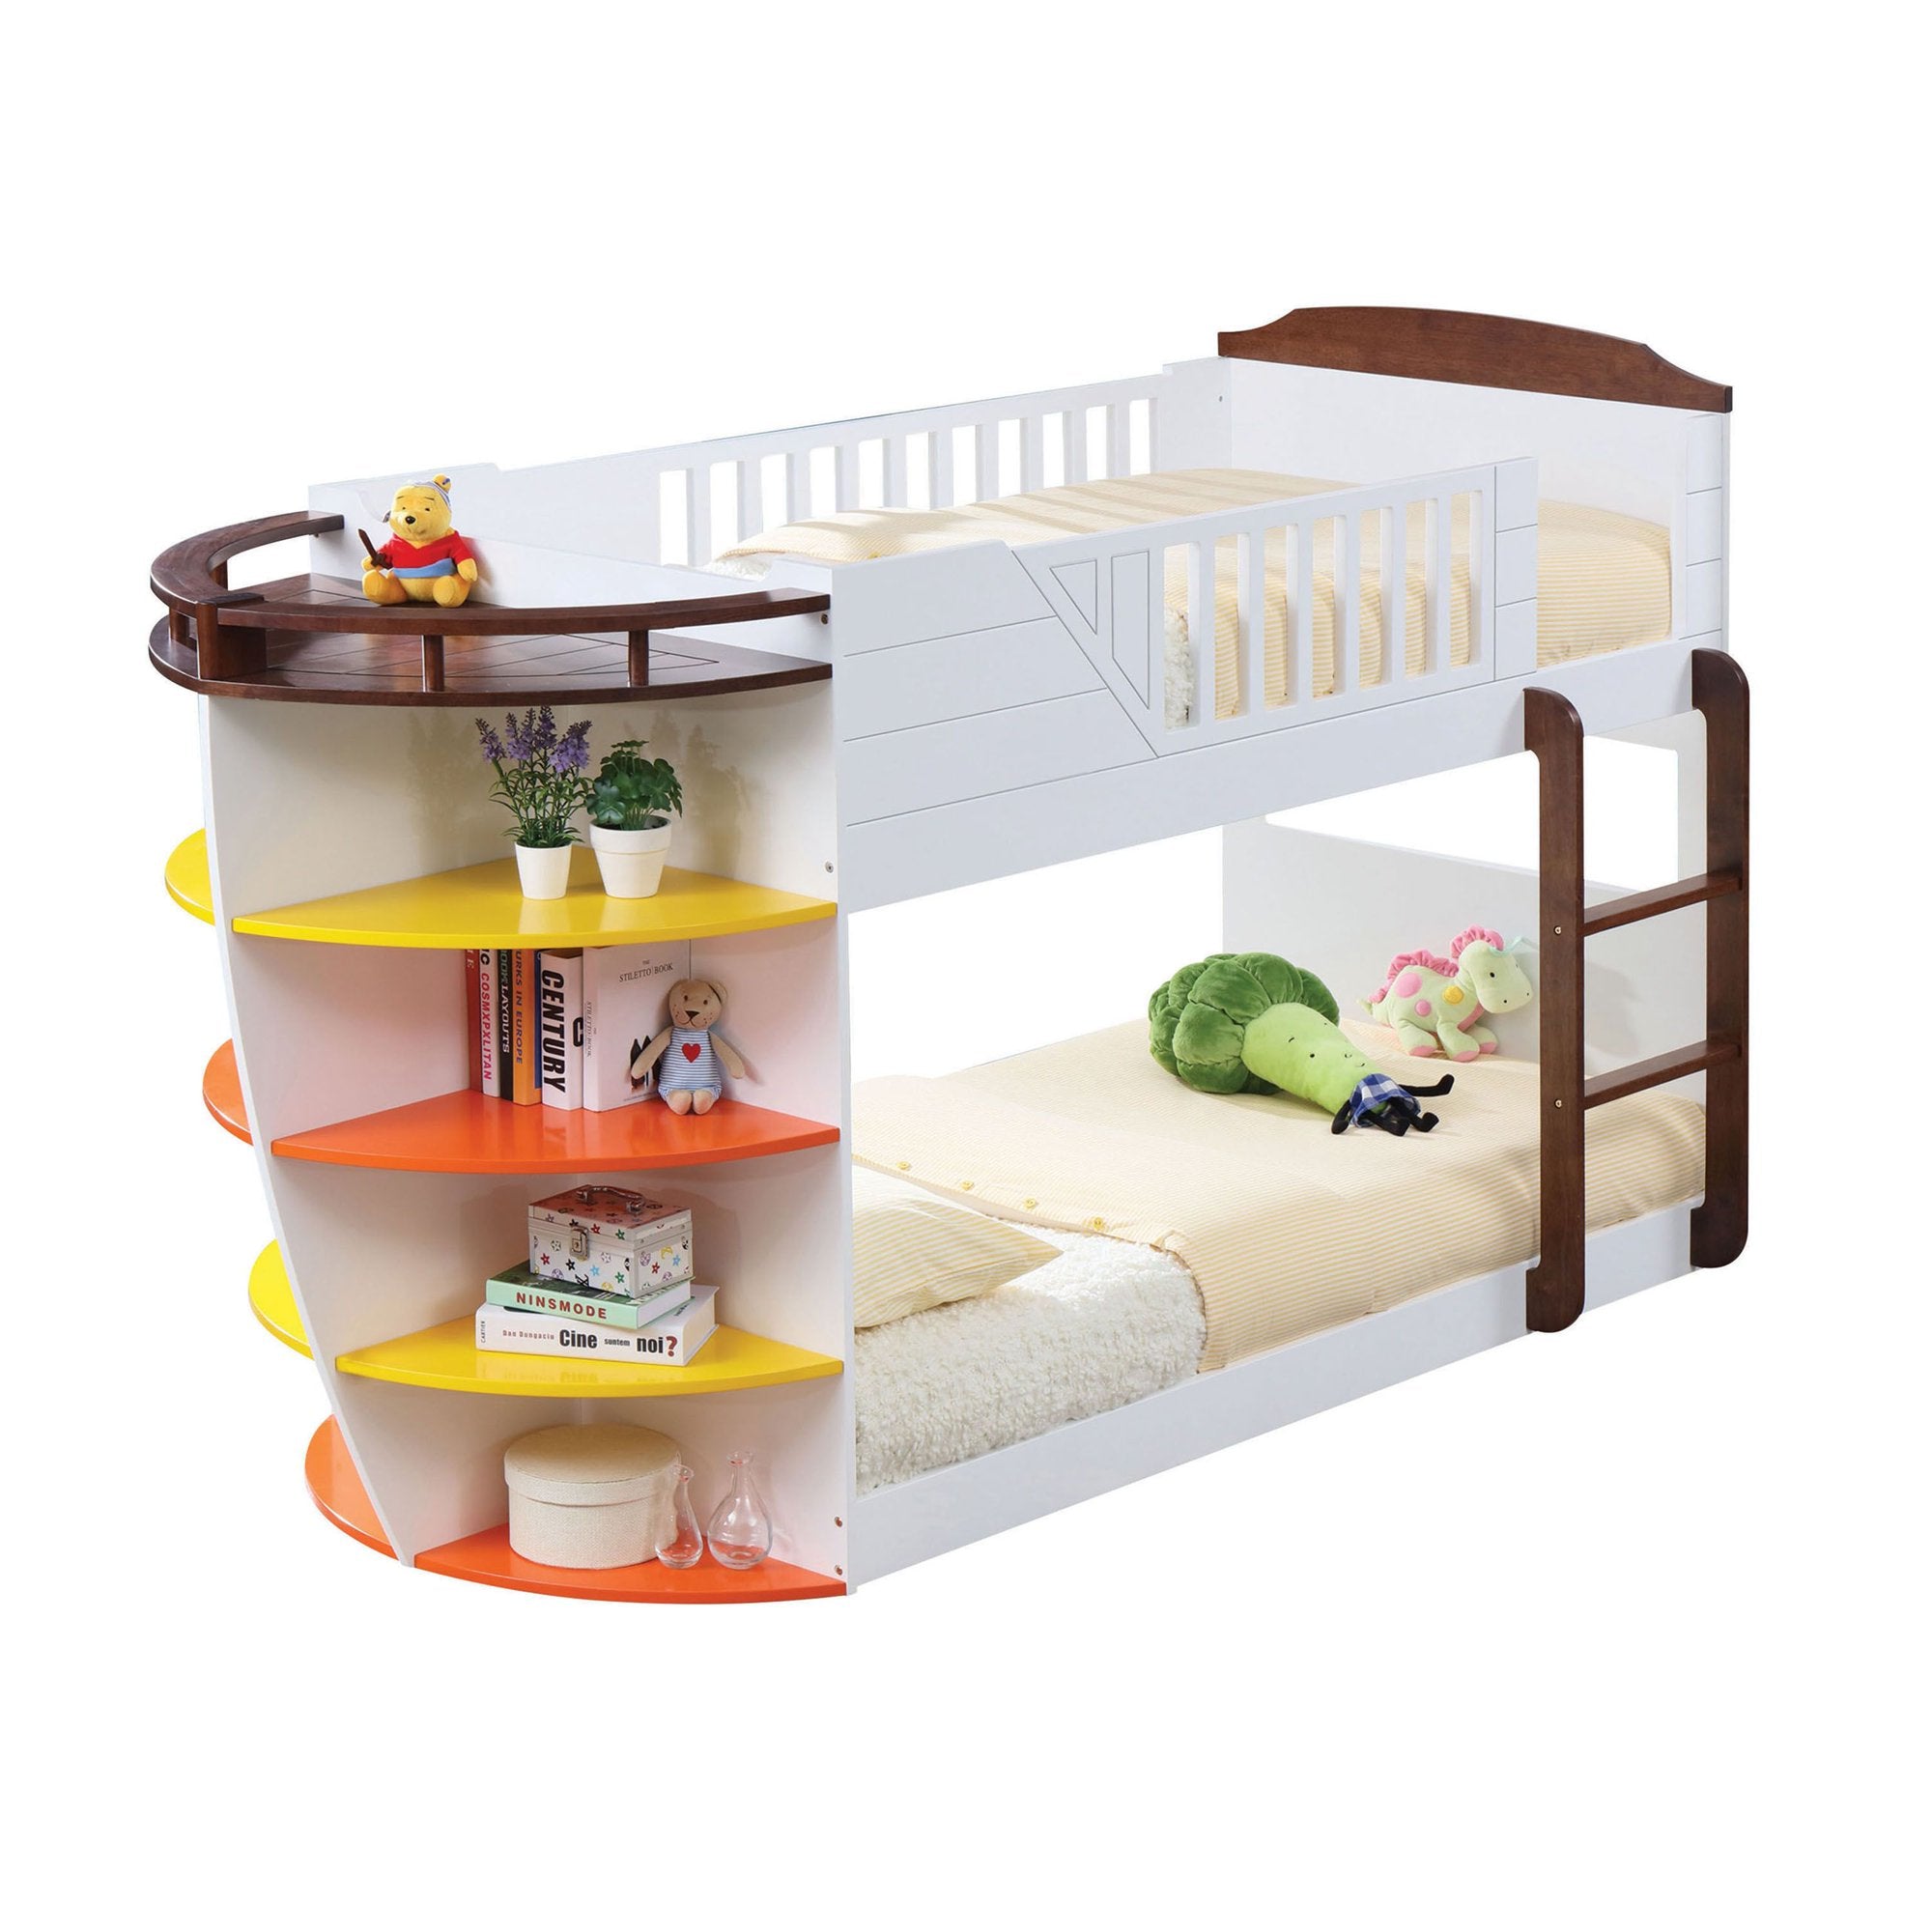 100" X 41" X 57" White And Chocolate Twin Over Twin Bunk Bed With Storage Shelf